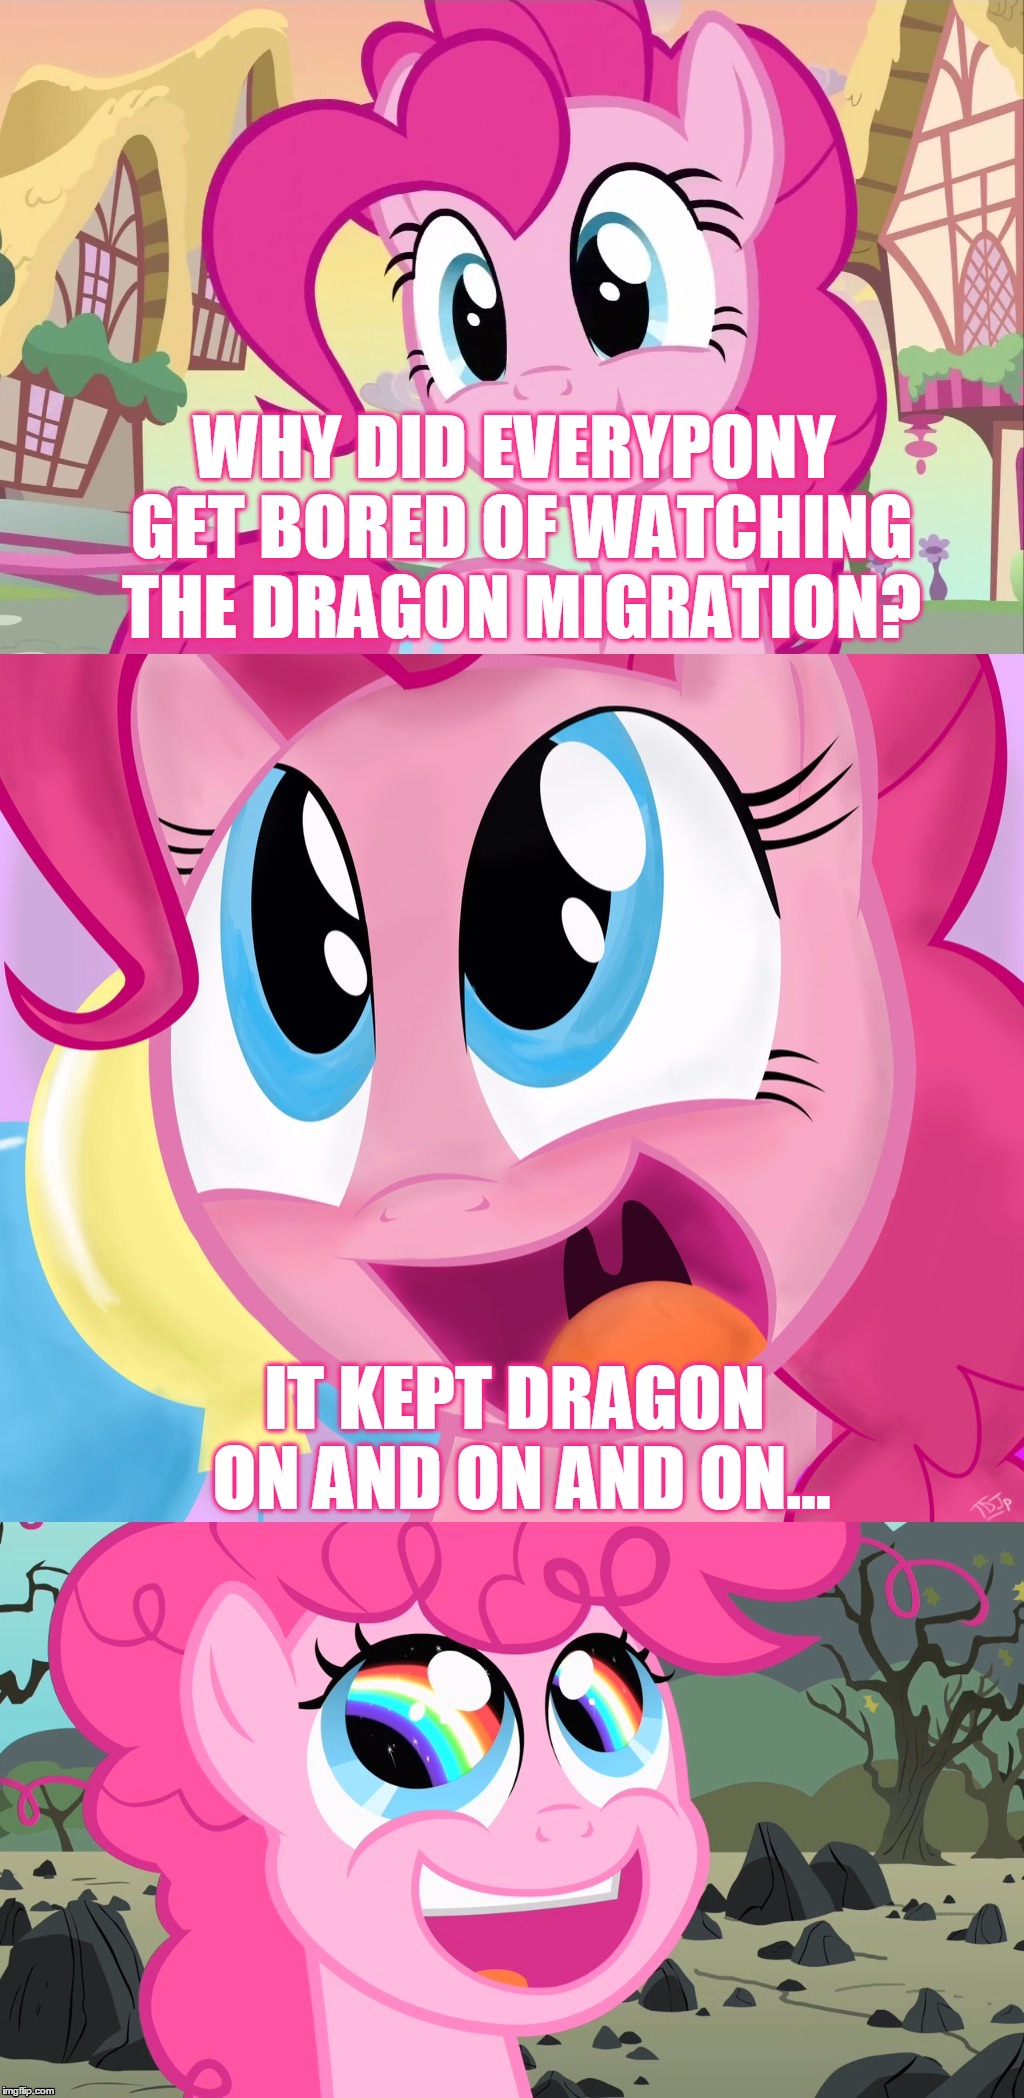 Bad Pun Pinkie Pie | WHY DID EVERYPONY GET BORED OF WATCHING THE DRAGON MIGRATION? IT KEPT DRAGON ON AND ON AND ON... | image tagged in bad pun pinkie pie,memes,bad pun,mlp,my little pony,pinkie pie | made w/ Imgflip meme maker